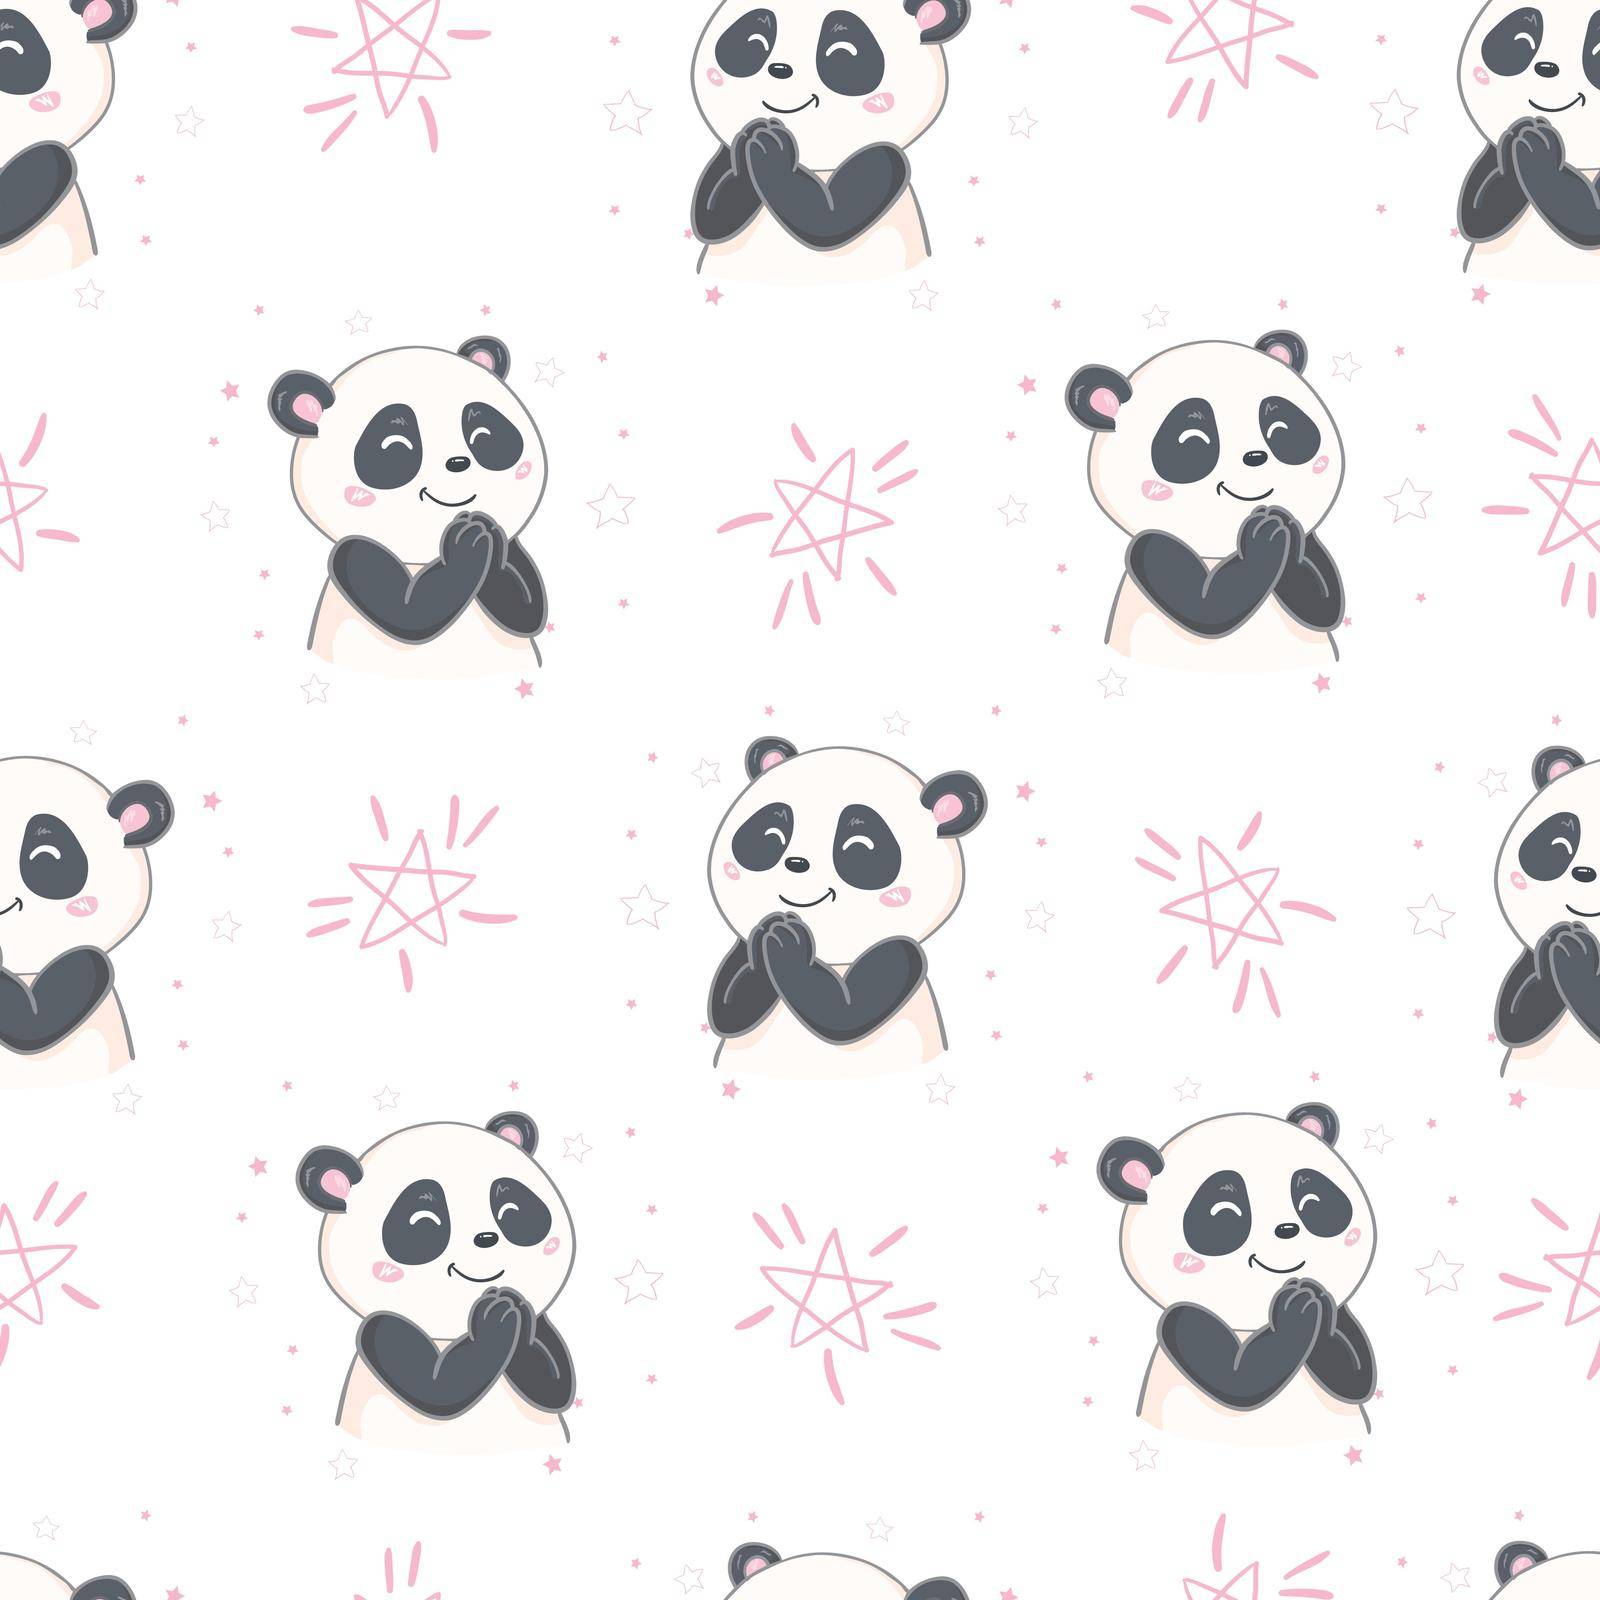 Seamless pattern with cute hand drawn panda' heads. Animal tiling background.